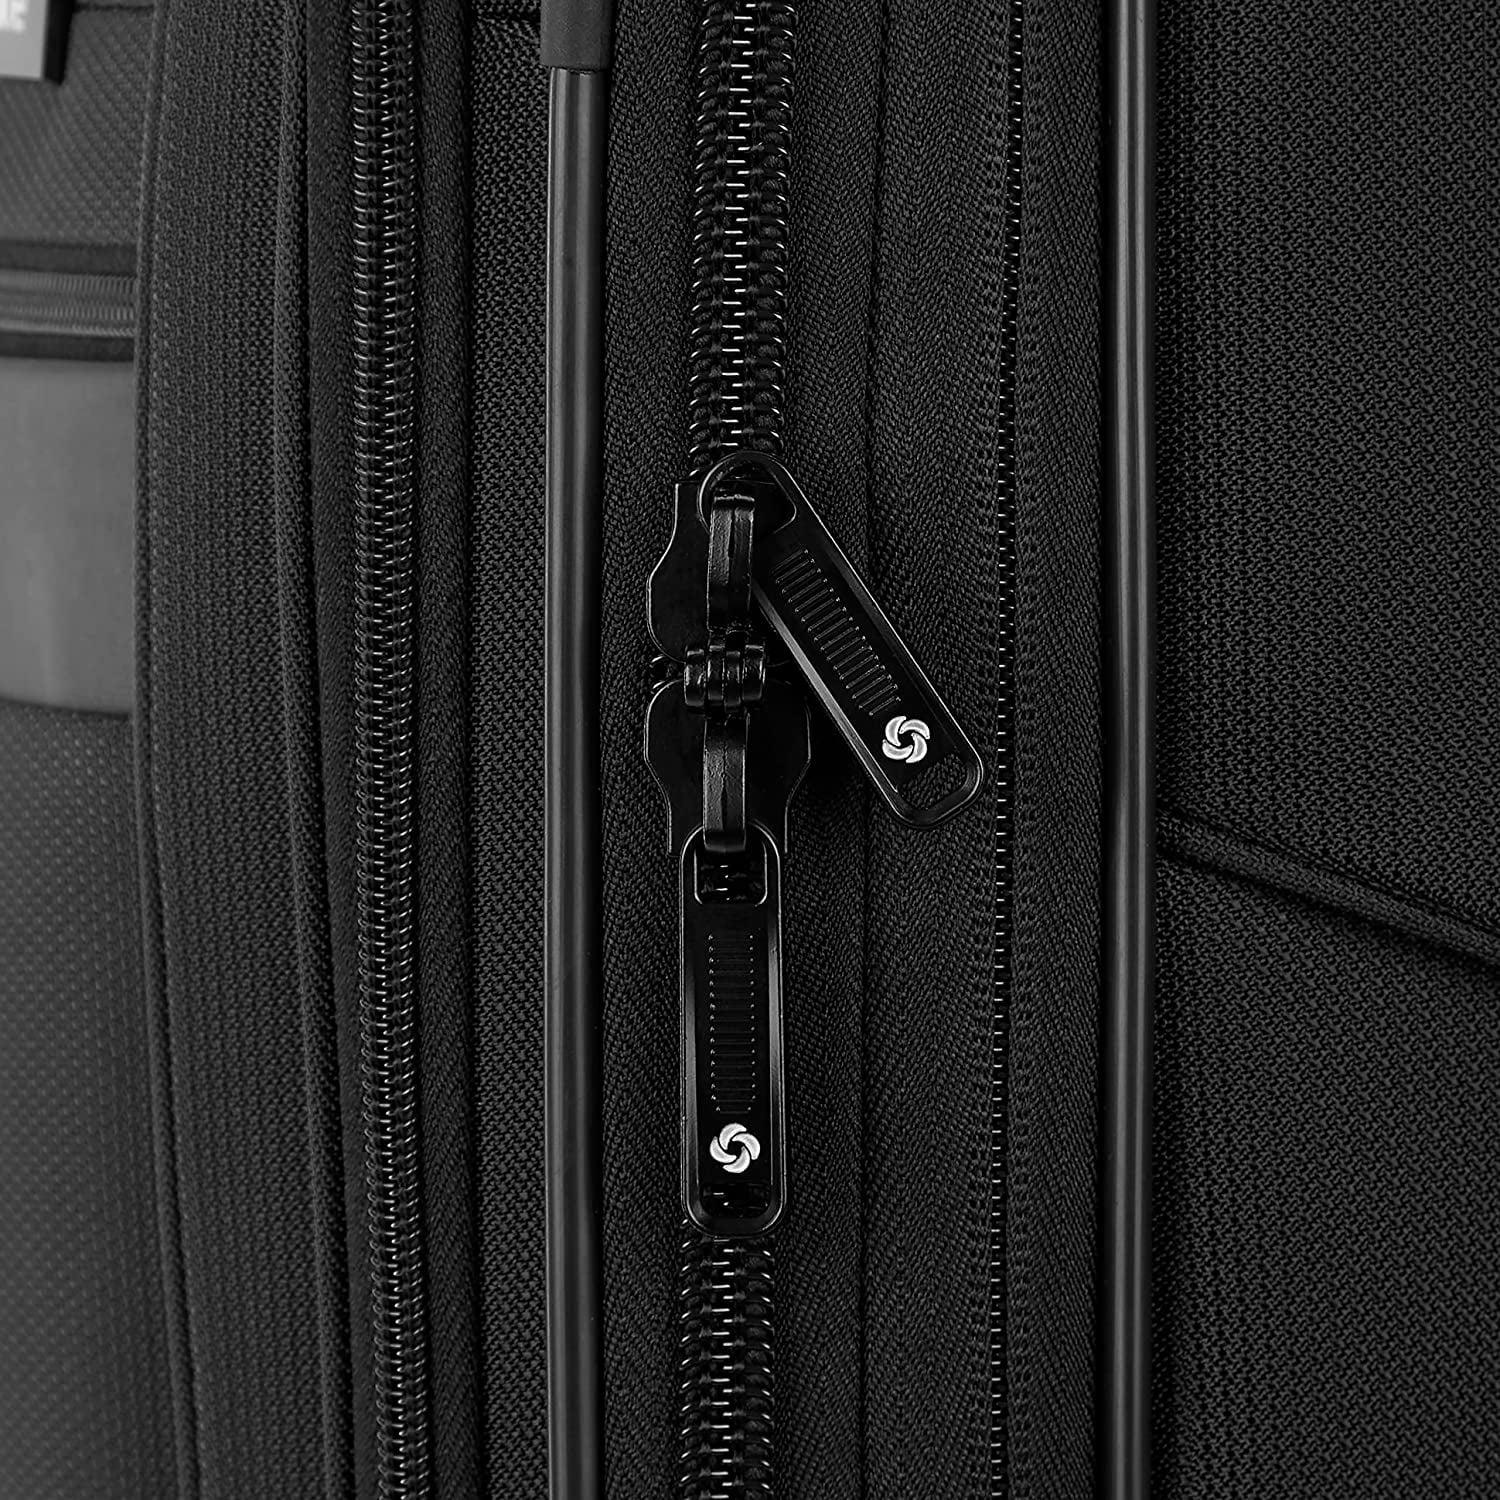 Samsonite Ascella 3.0 Softside Expandable Luggage with Spinner